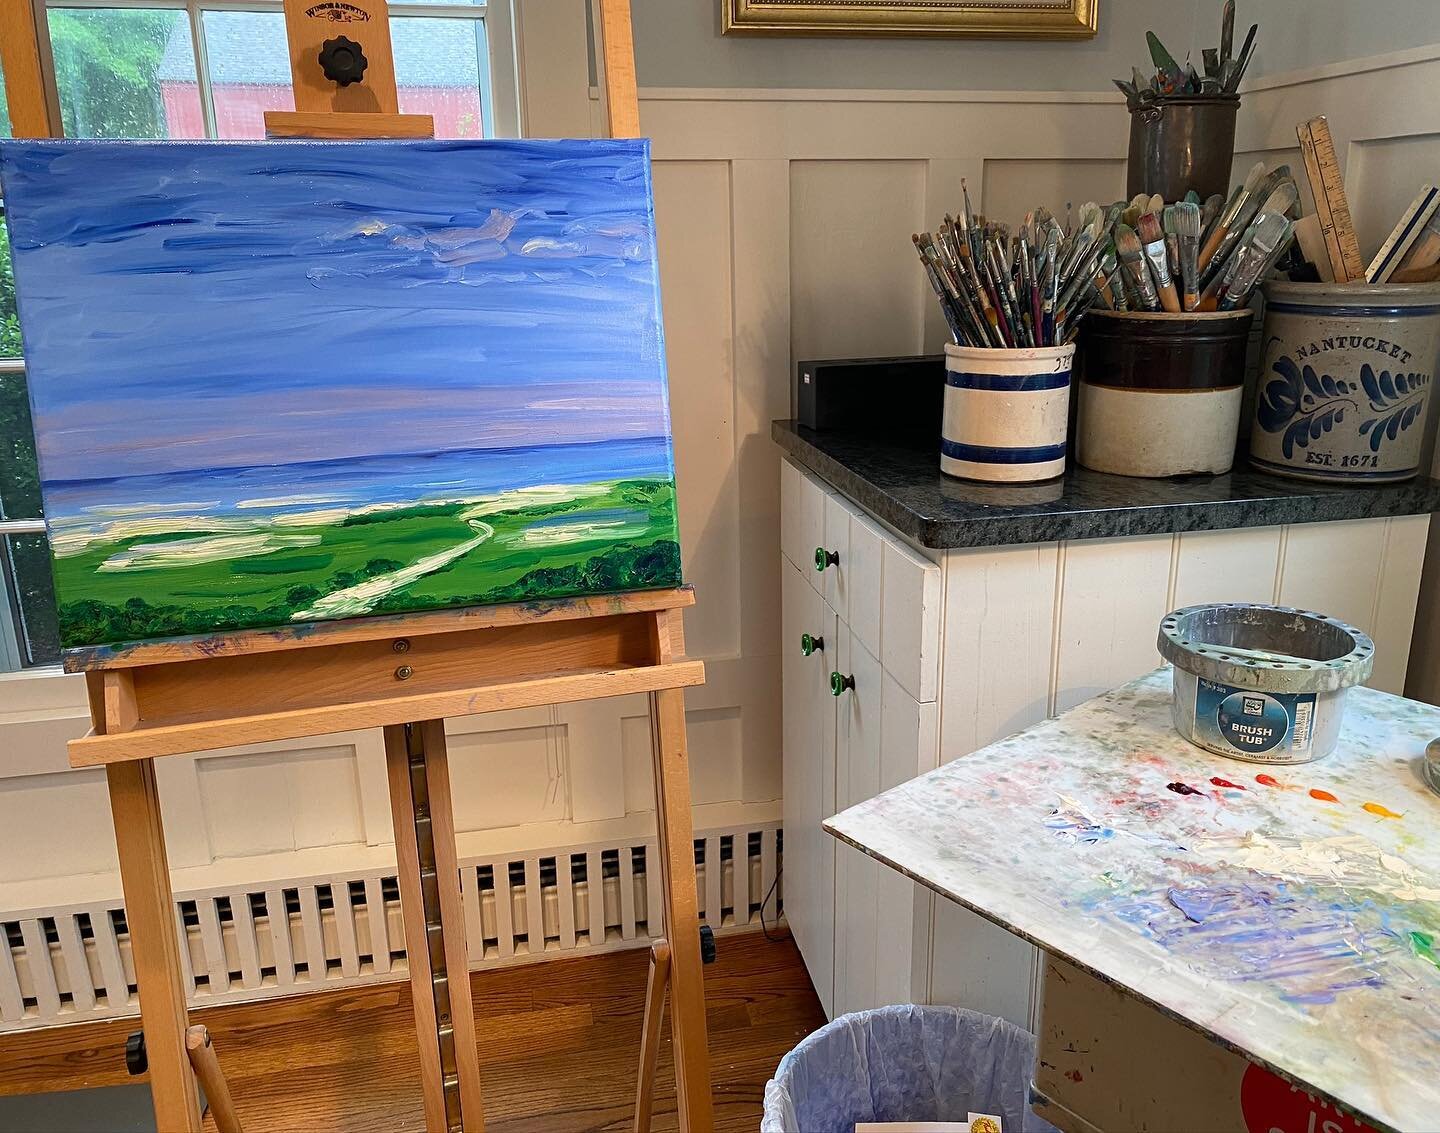 Work in progress on the easel! 🎨💙💜💚🤍 #sagegoldsmithpaintings #artistsoninstagram #art #create #ontheeasel #landscape #sky #water #ocean #road #sand #colors #colorist #oilpainting #canvas #serene #supportlocal #supportlocalartists